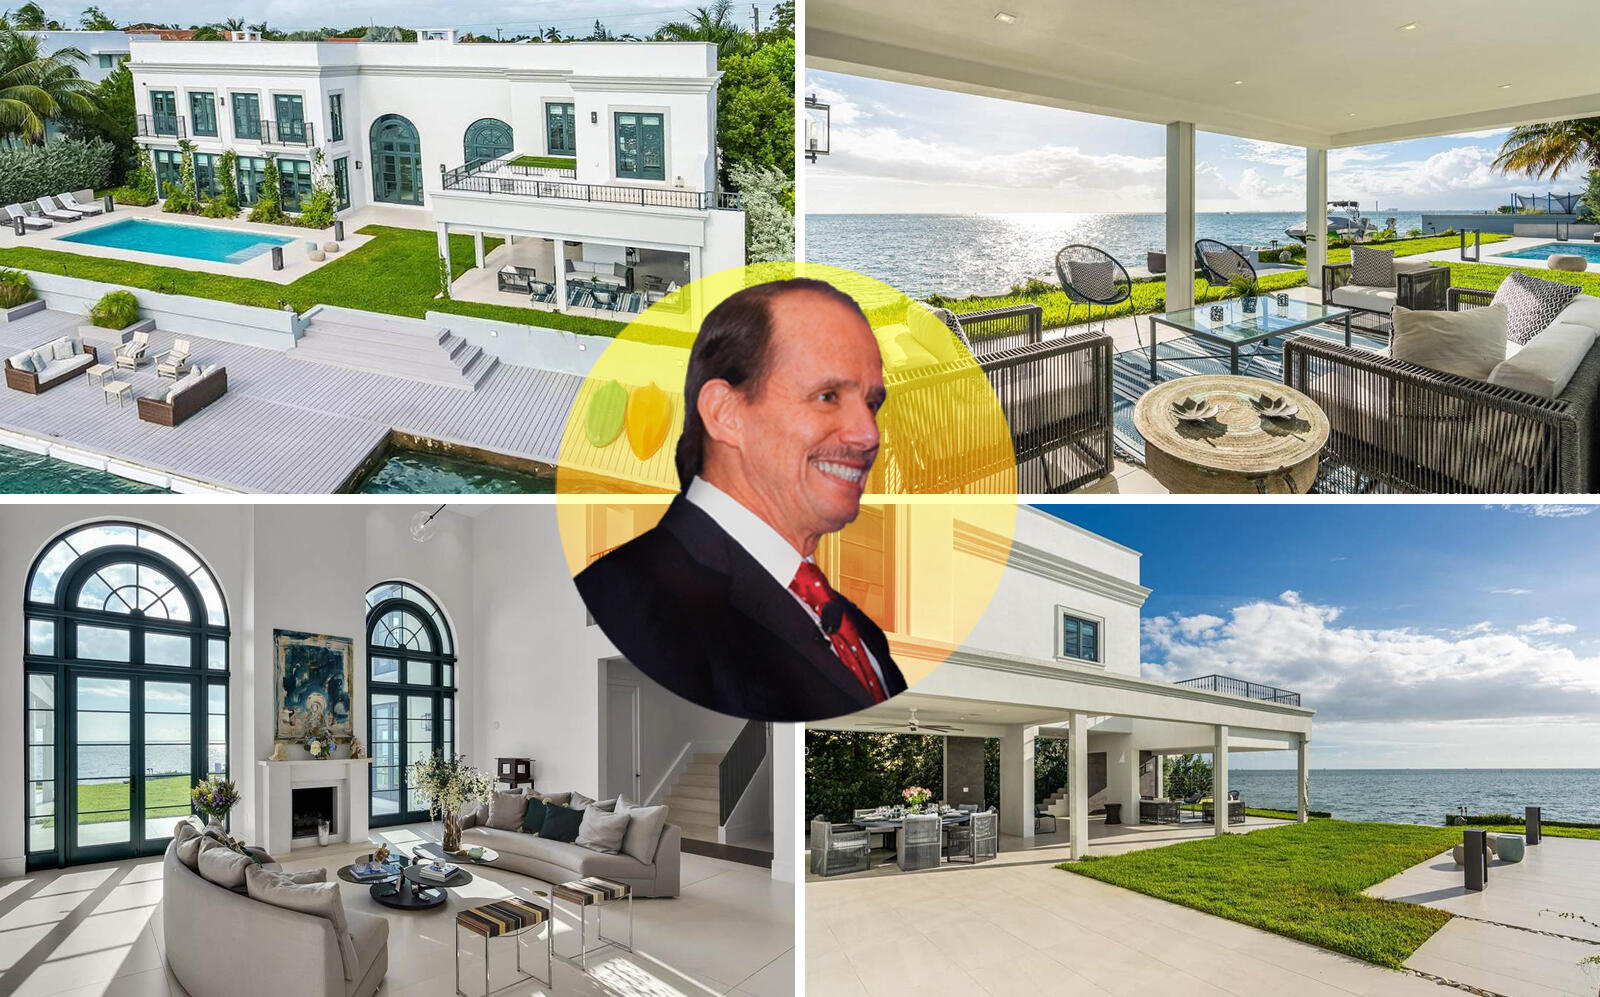 Eduardo Belmont Anderson with the Key Biscayne property (Berkshire Hathaway Home Services EWM Realty, Belmont)